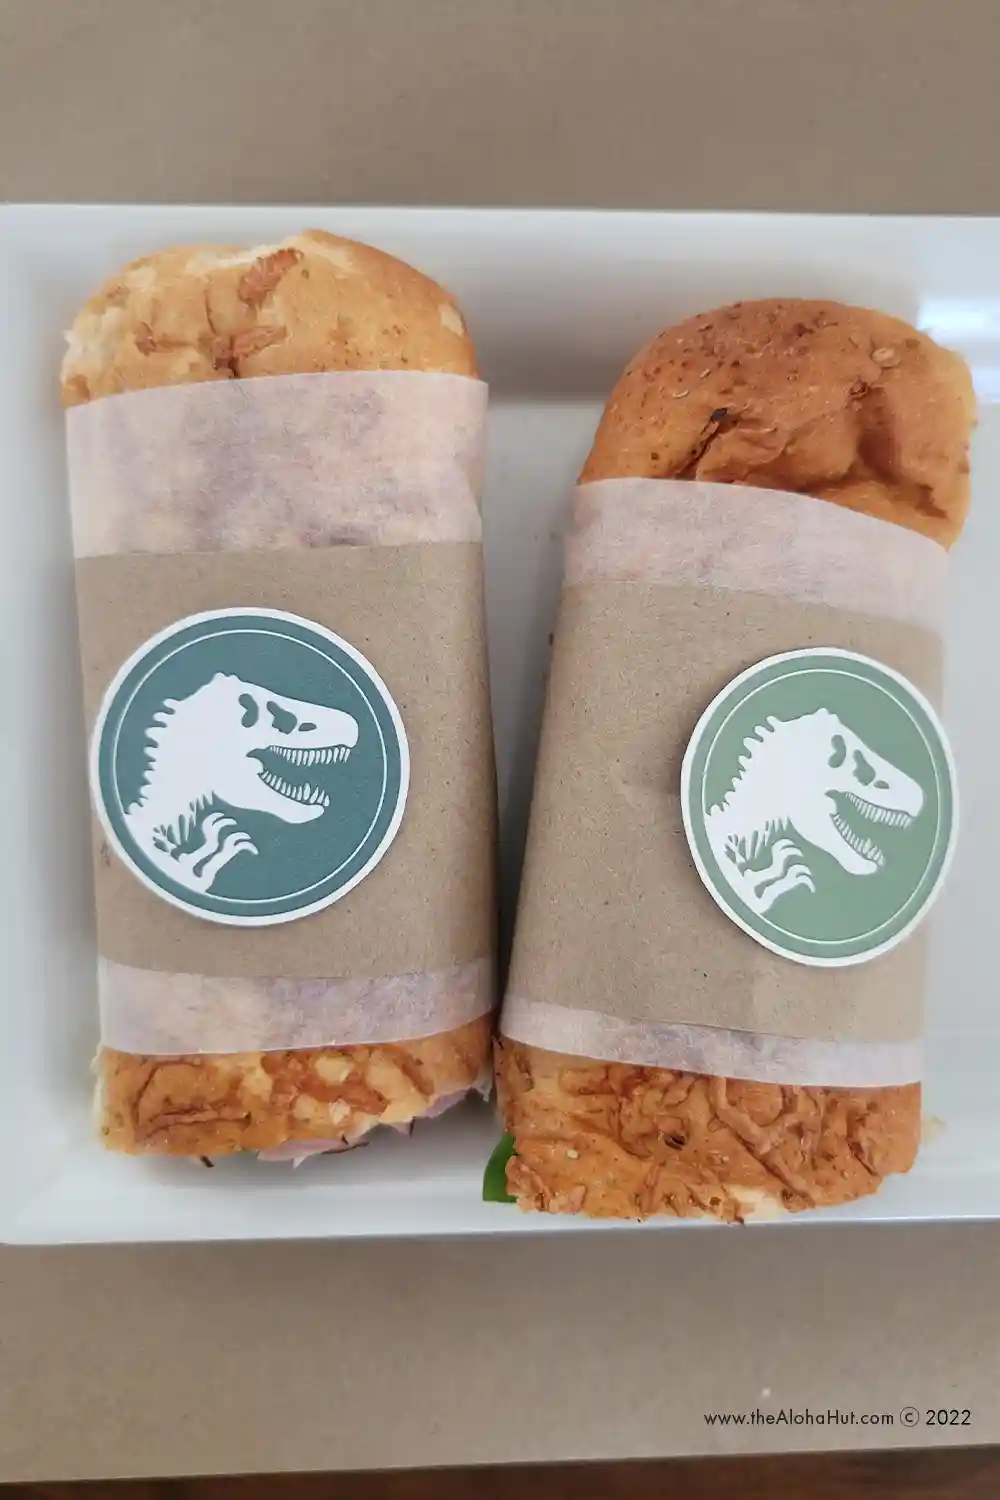 Jurassic World Camp Cretaceous Party Ideas - Dinosaur Party Ideas - free printable party decor & games - party favor tags